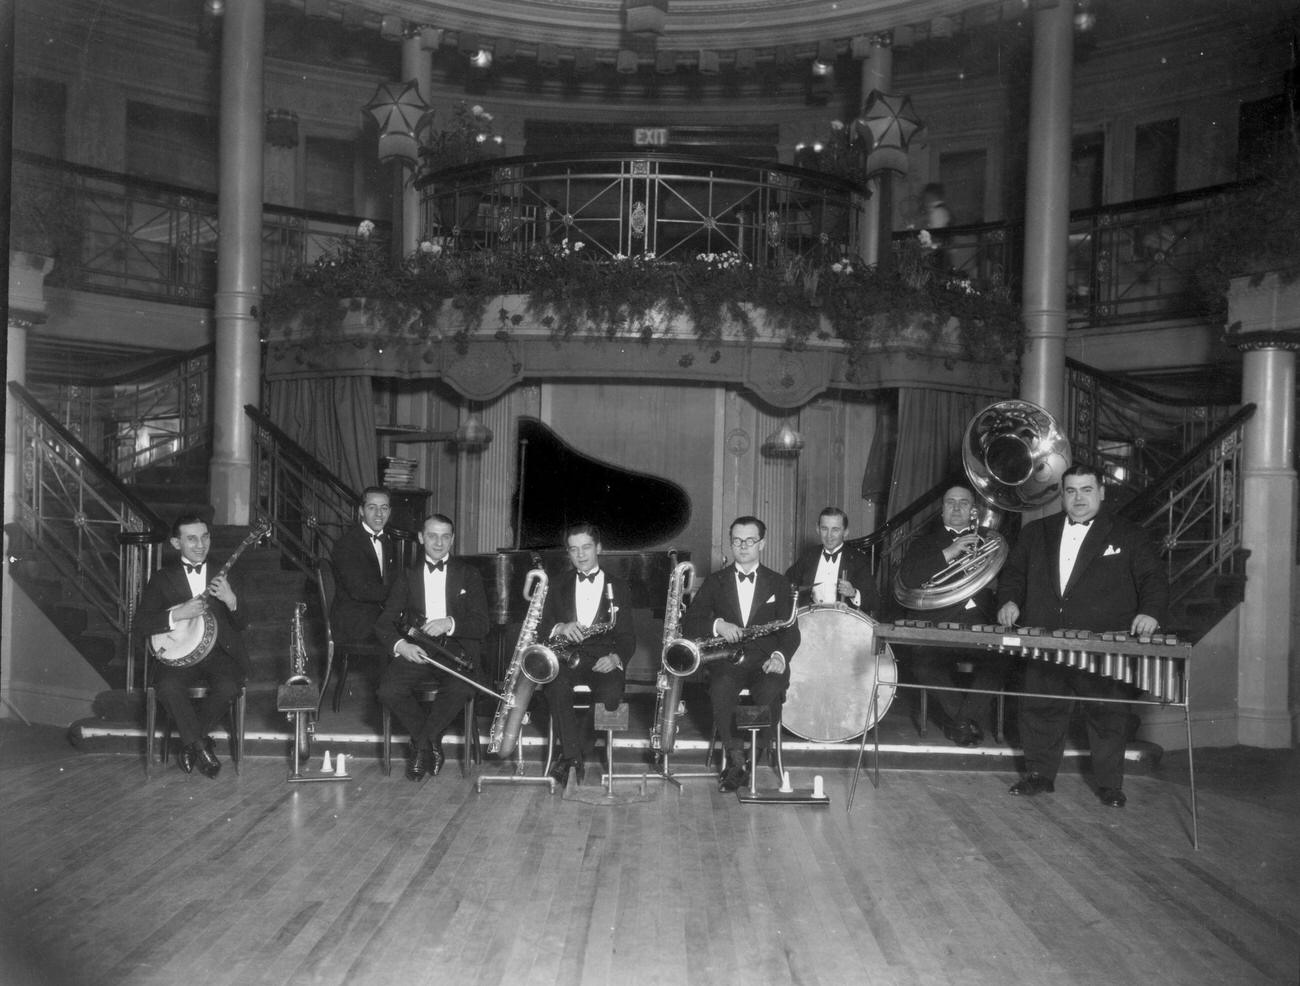 Teddy Brown's Band Playing at Cafe de Paris, London, 1925